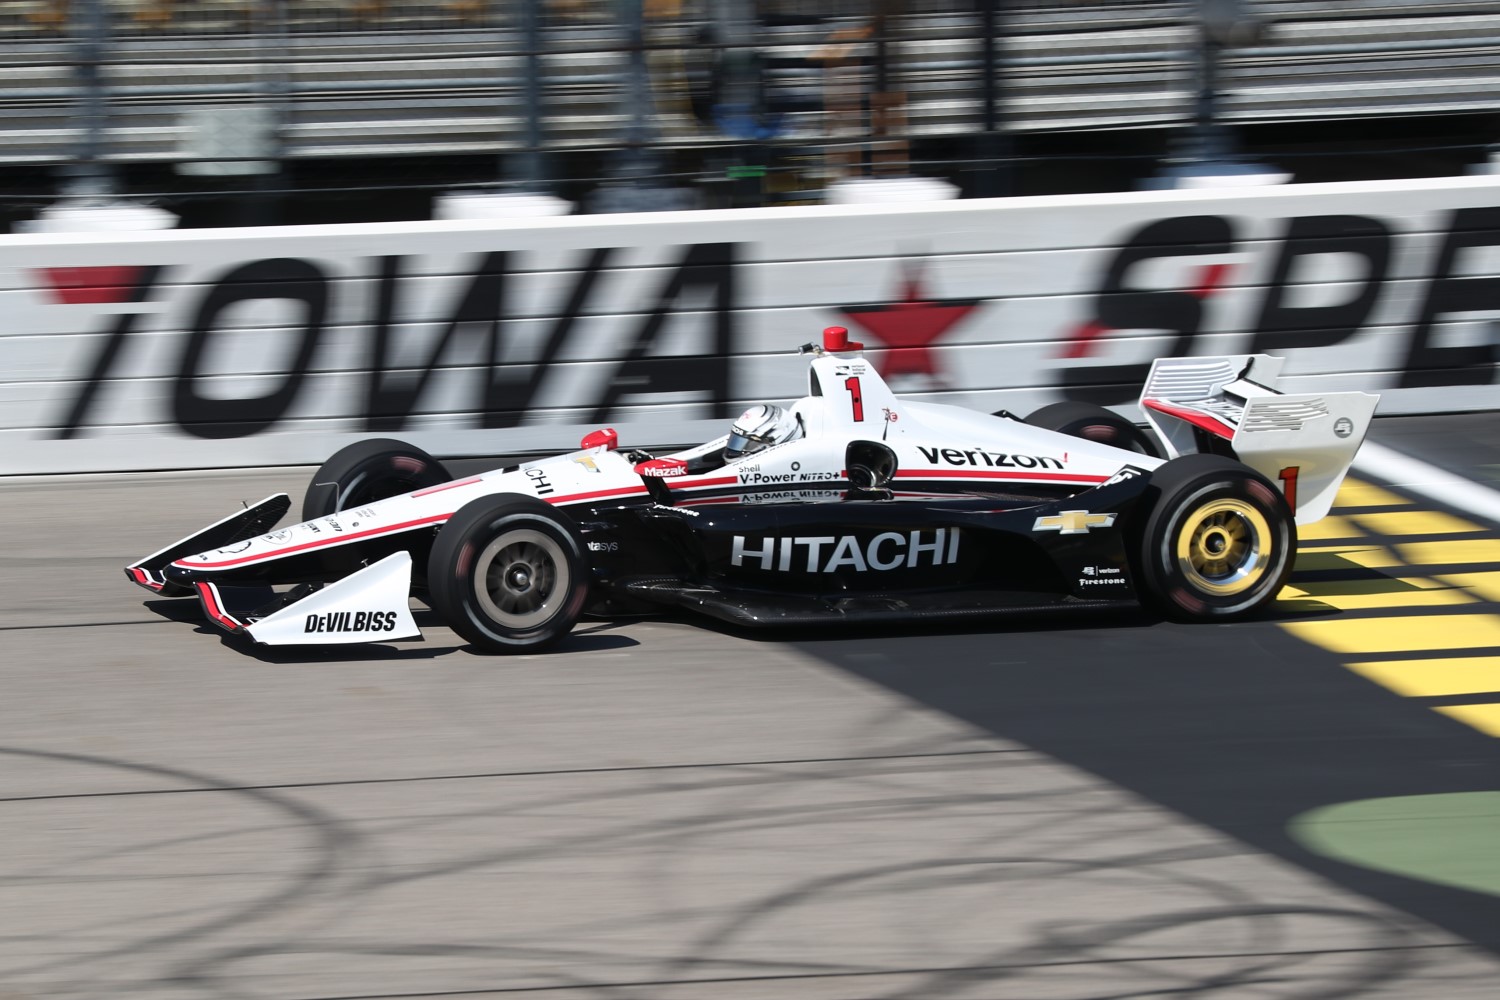 Newgarden in position to dominate the weekend.